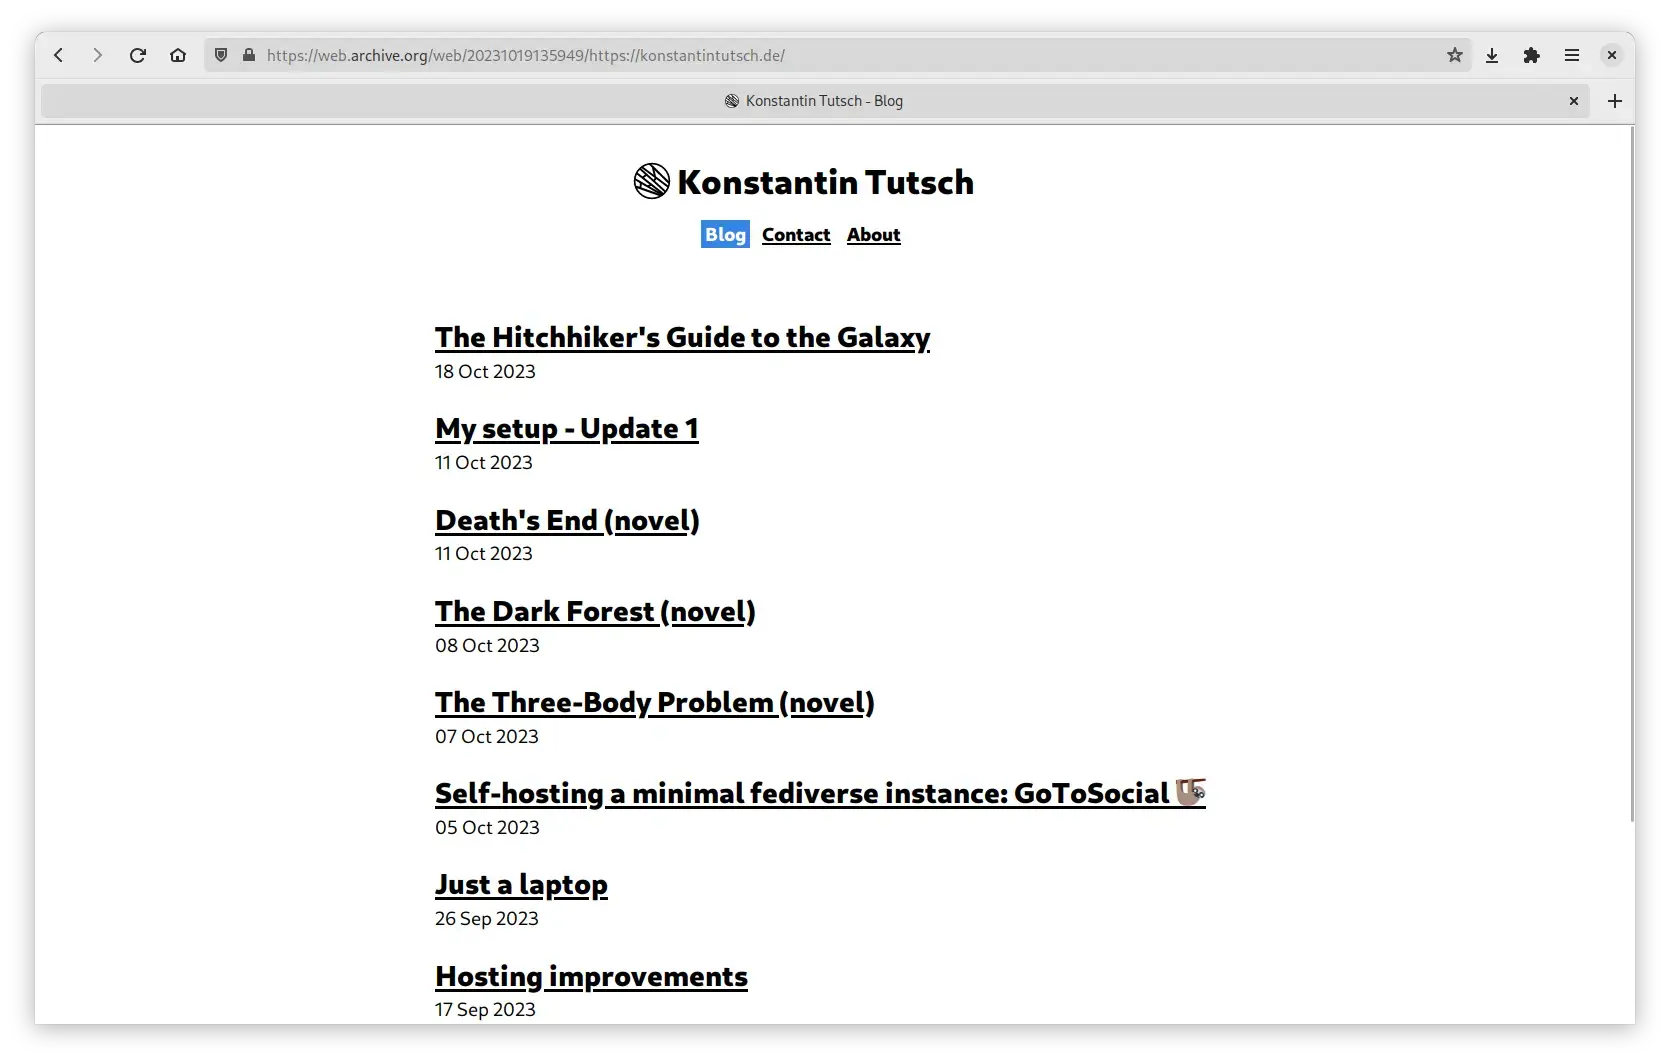 A browser window with this site open. Logo + title “Konstantin Tutsch”, below links to the Blog, Contact and About page.